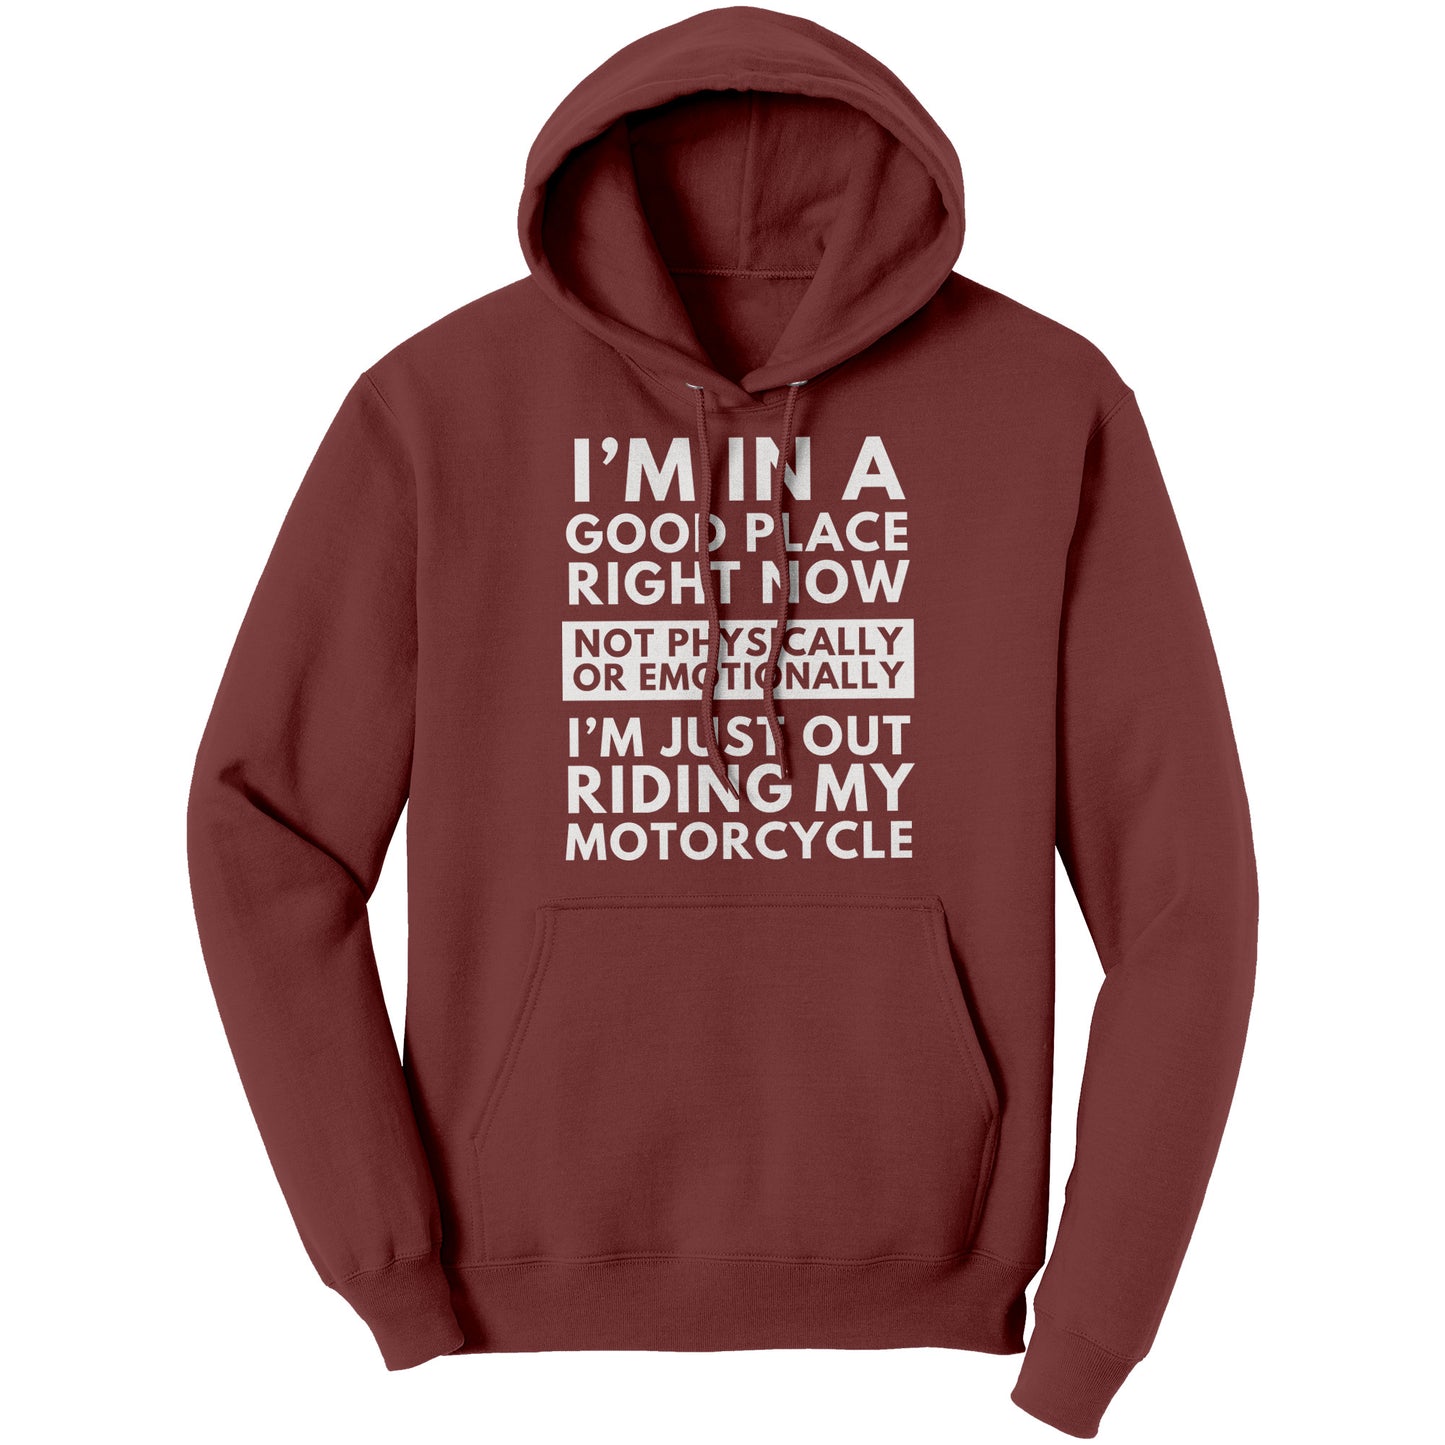 I'm in a Good Place right now, Motorcycle - Standard Hoodie